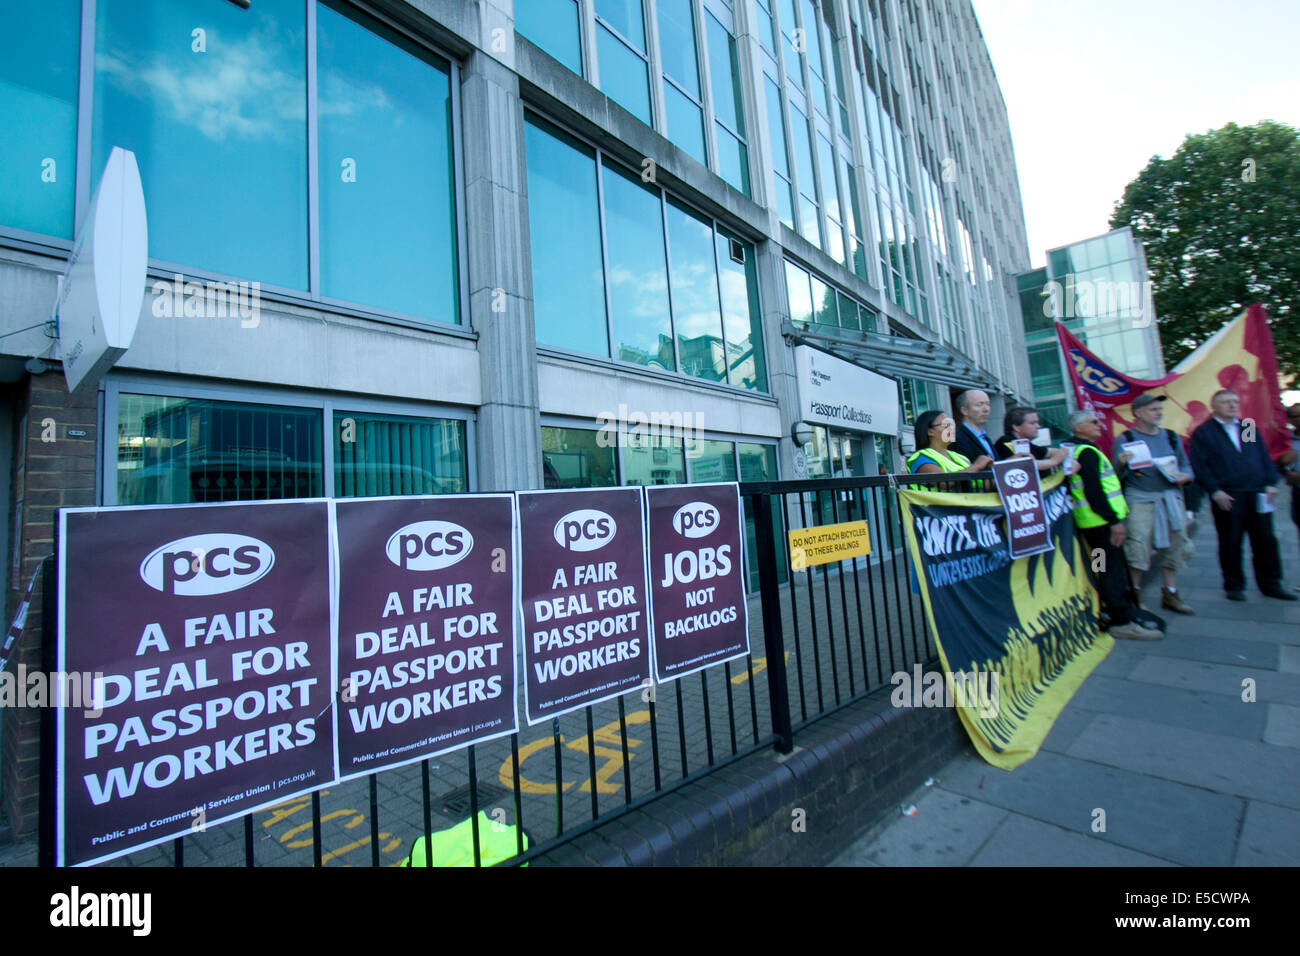 London, UK. 28th July 2014. Staff staged a one day walk out at the UK passport office over pay cuts, staff shortages and pensions Stock Photo